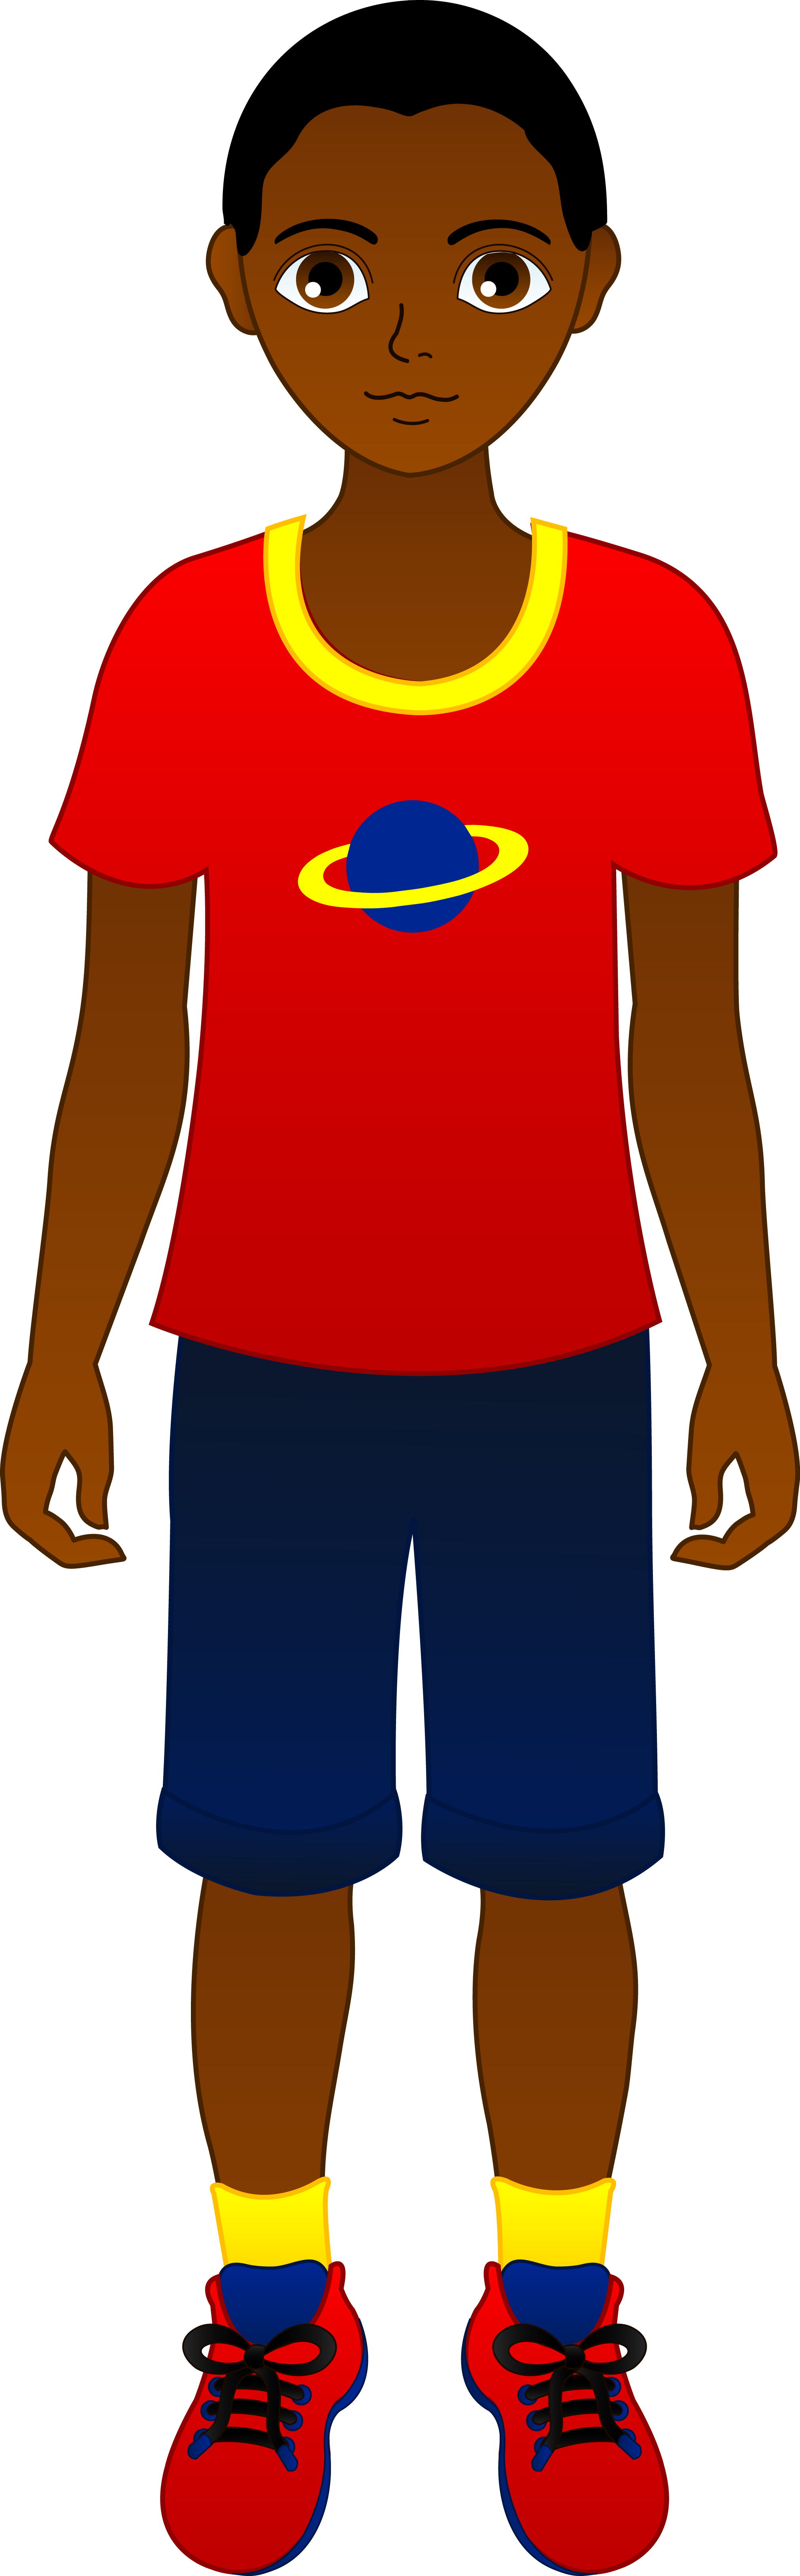 Free Black Teen Cliparts, Download Free Clip Art, Free Clip Art on.